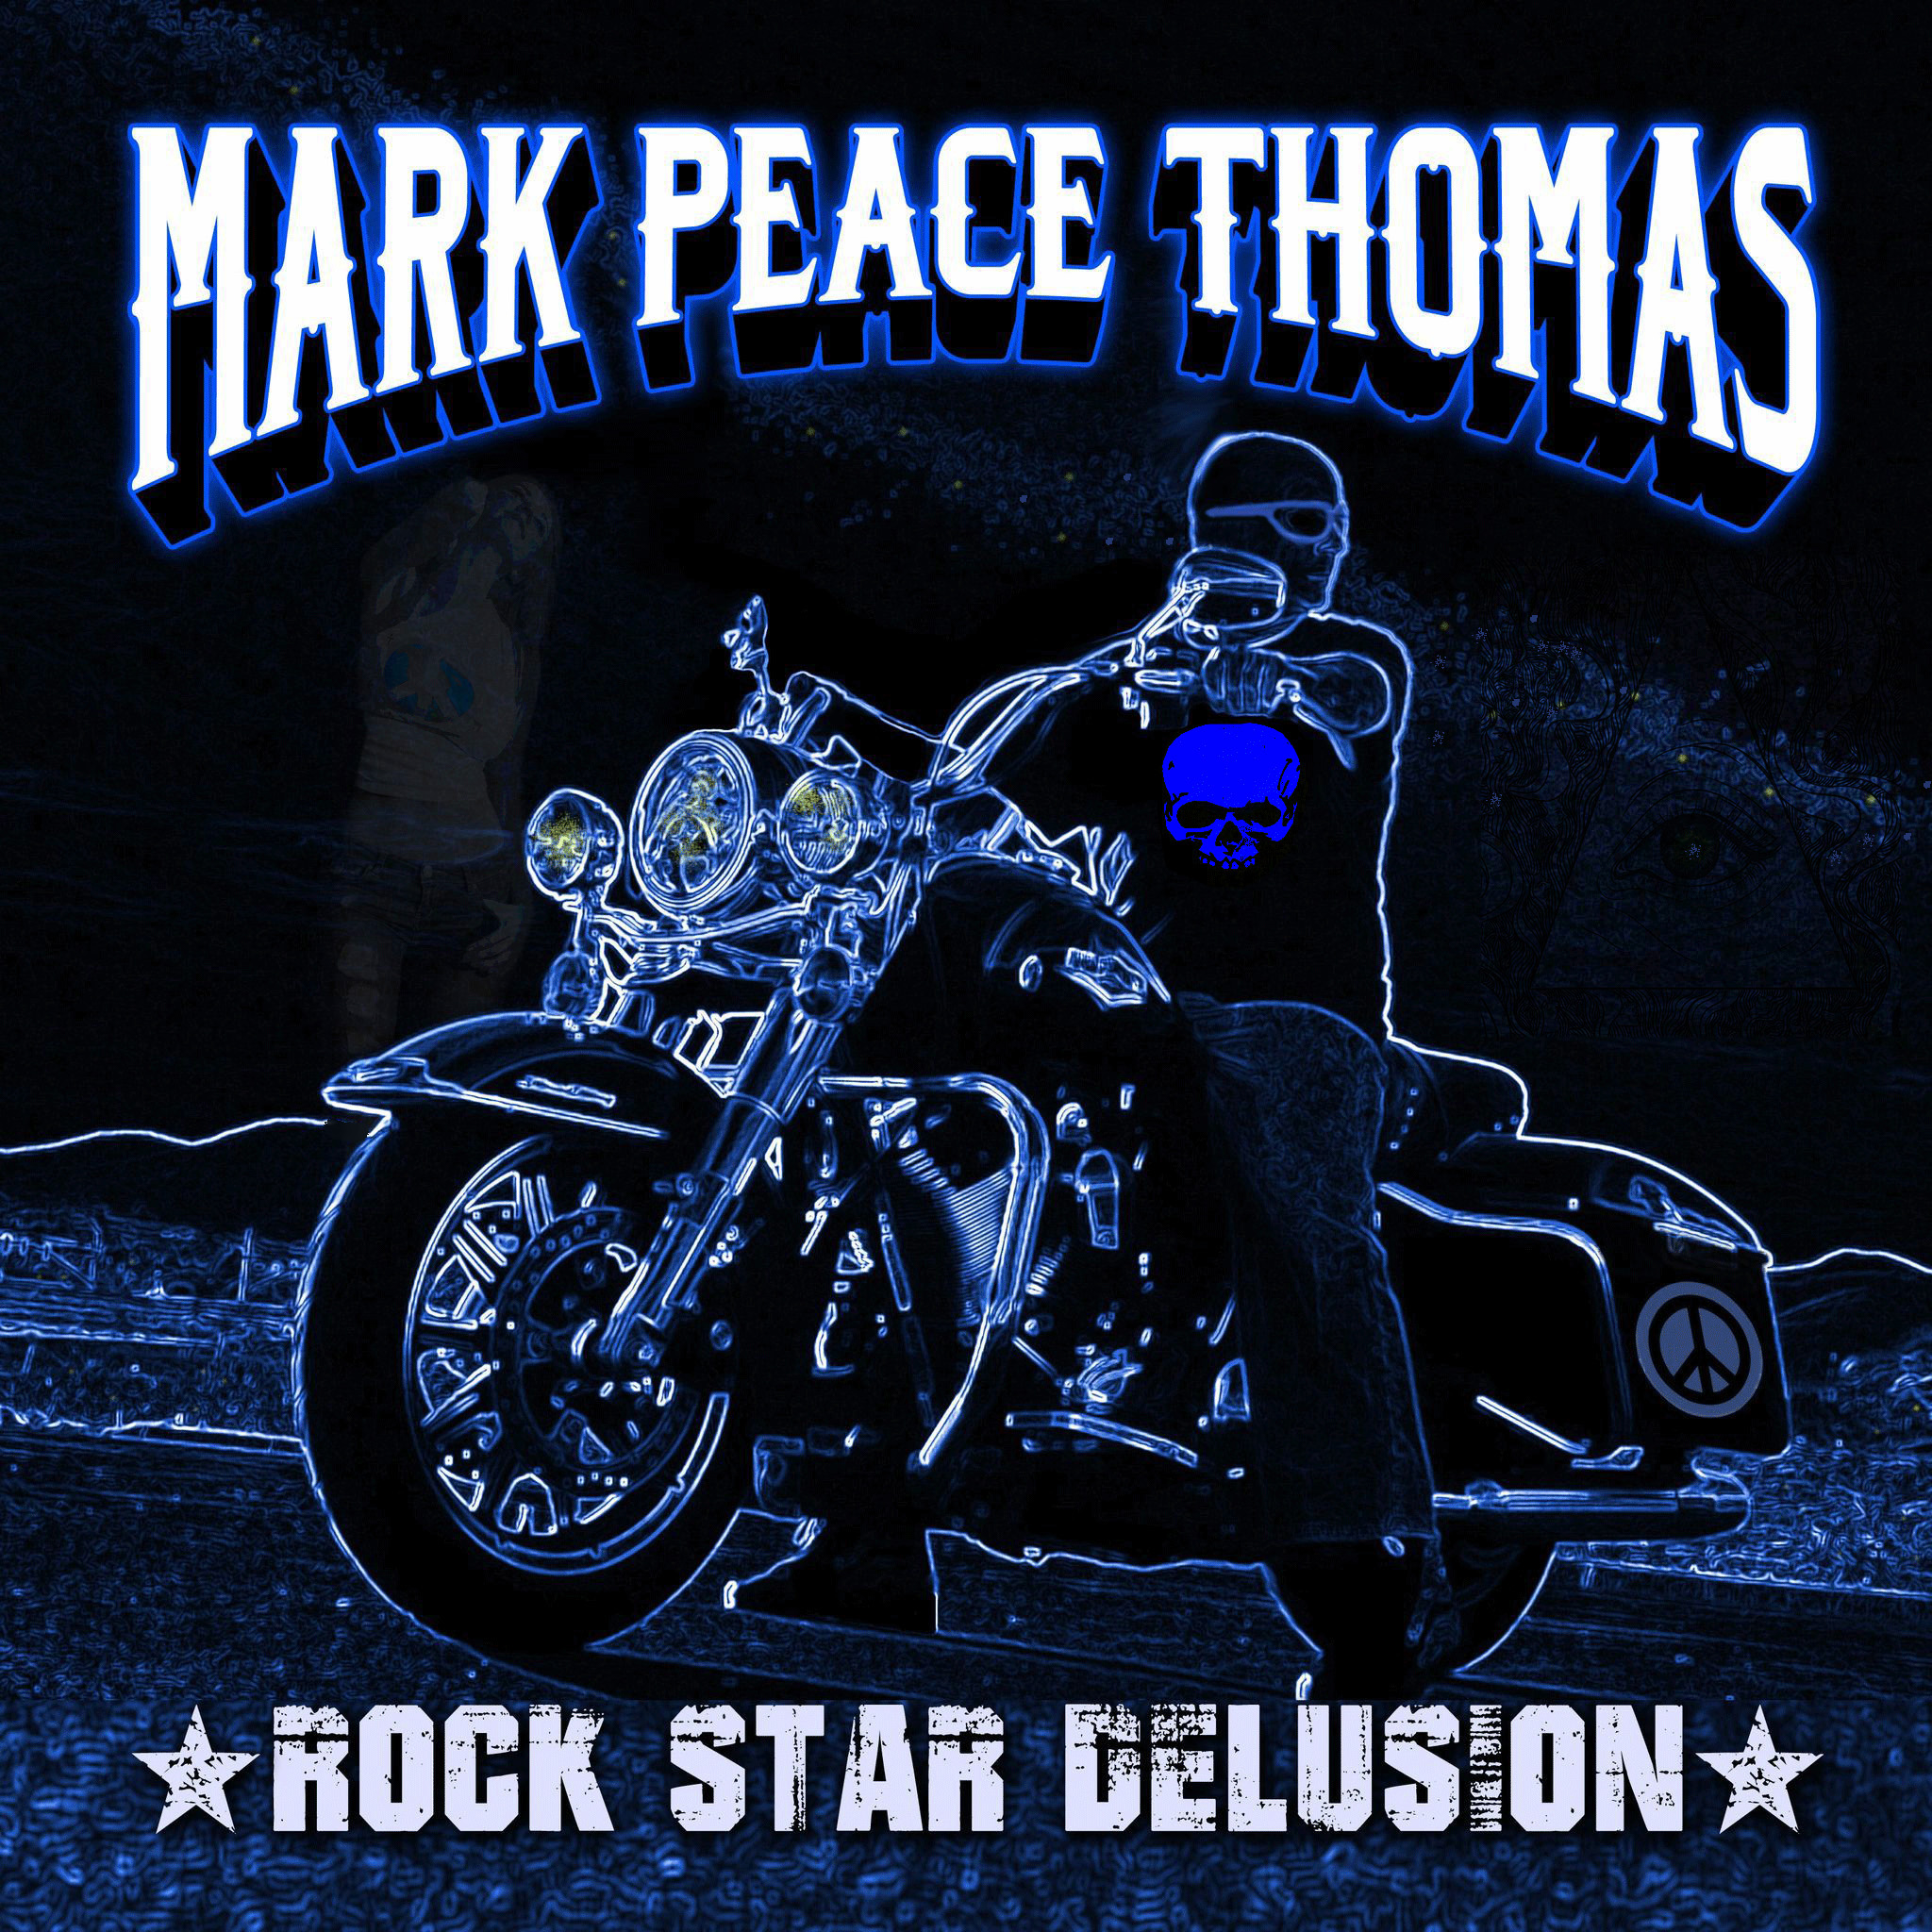 Musicians Wanted for Mark Peace Thomas' Rock Star Delusion